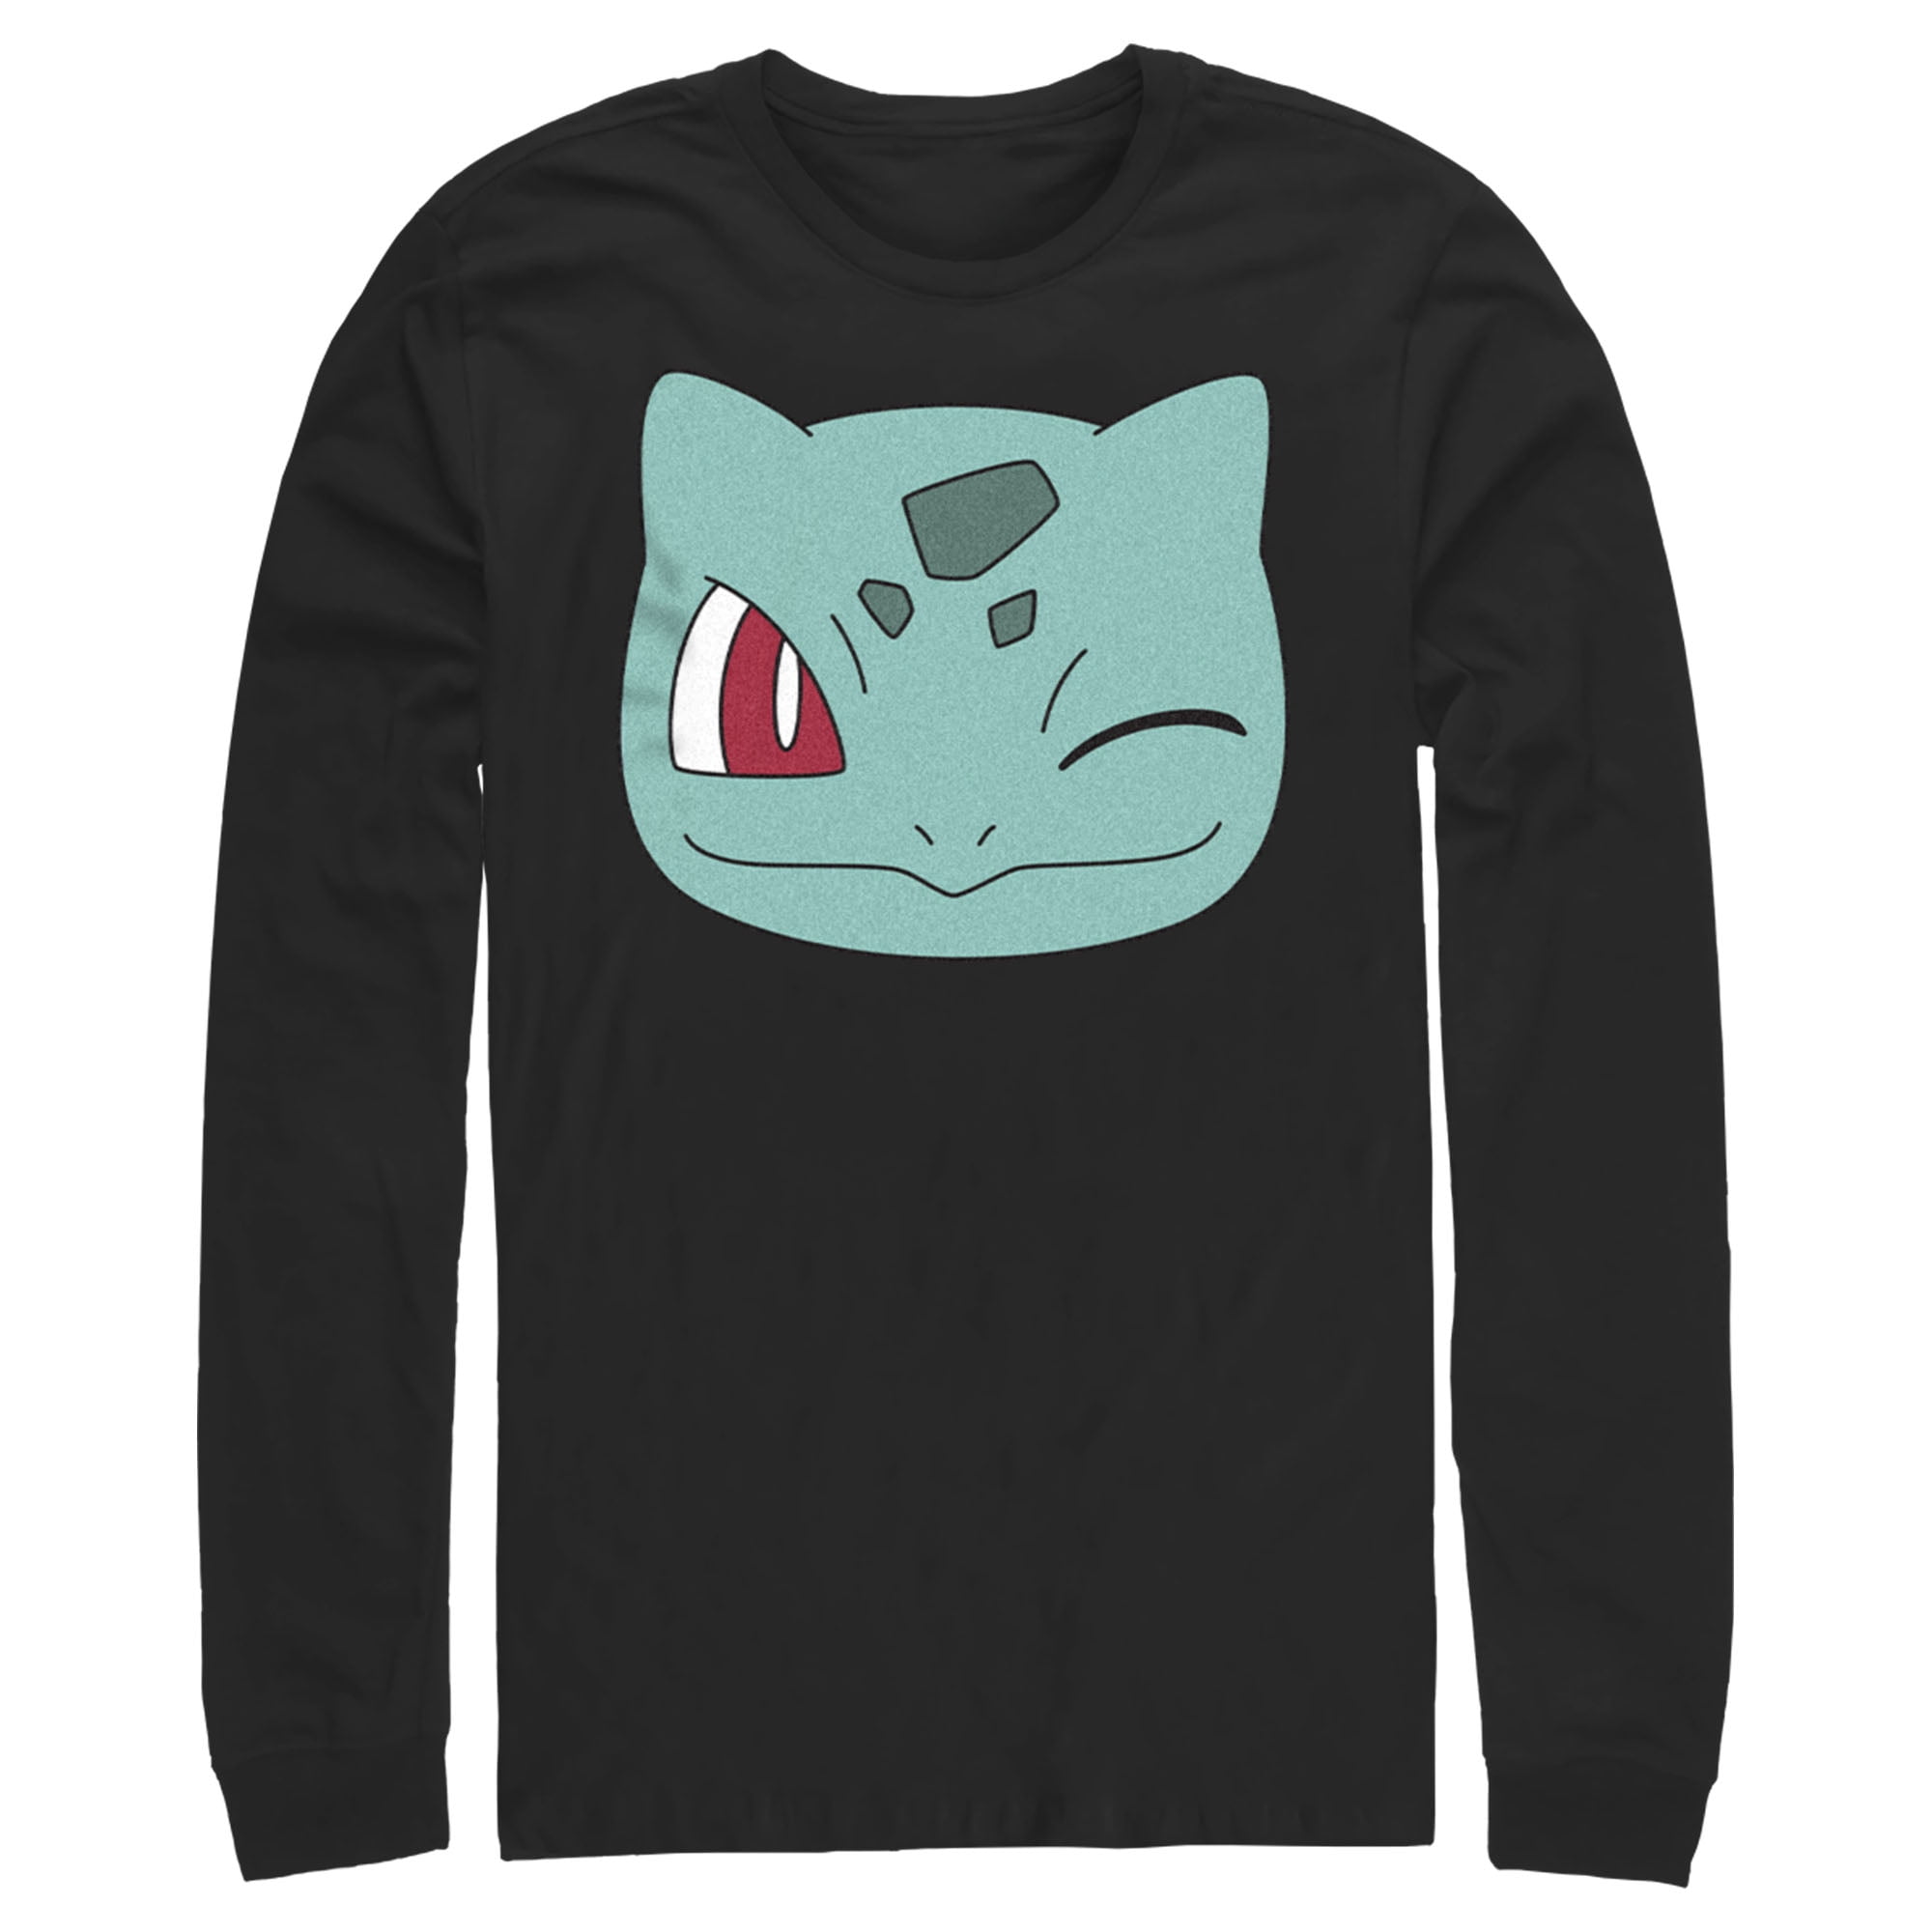 Pokemon Bulbasaur Lovely Coloring Page » Turkau